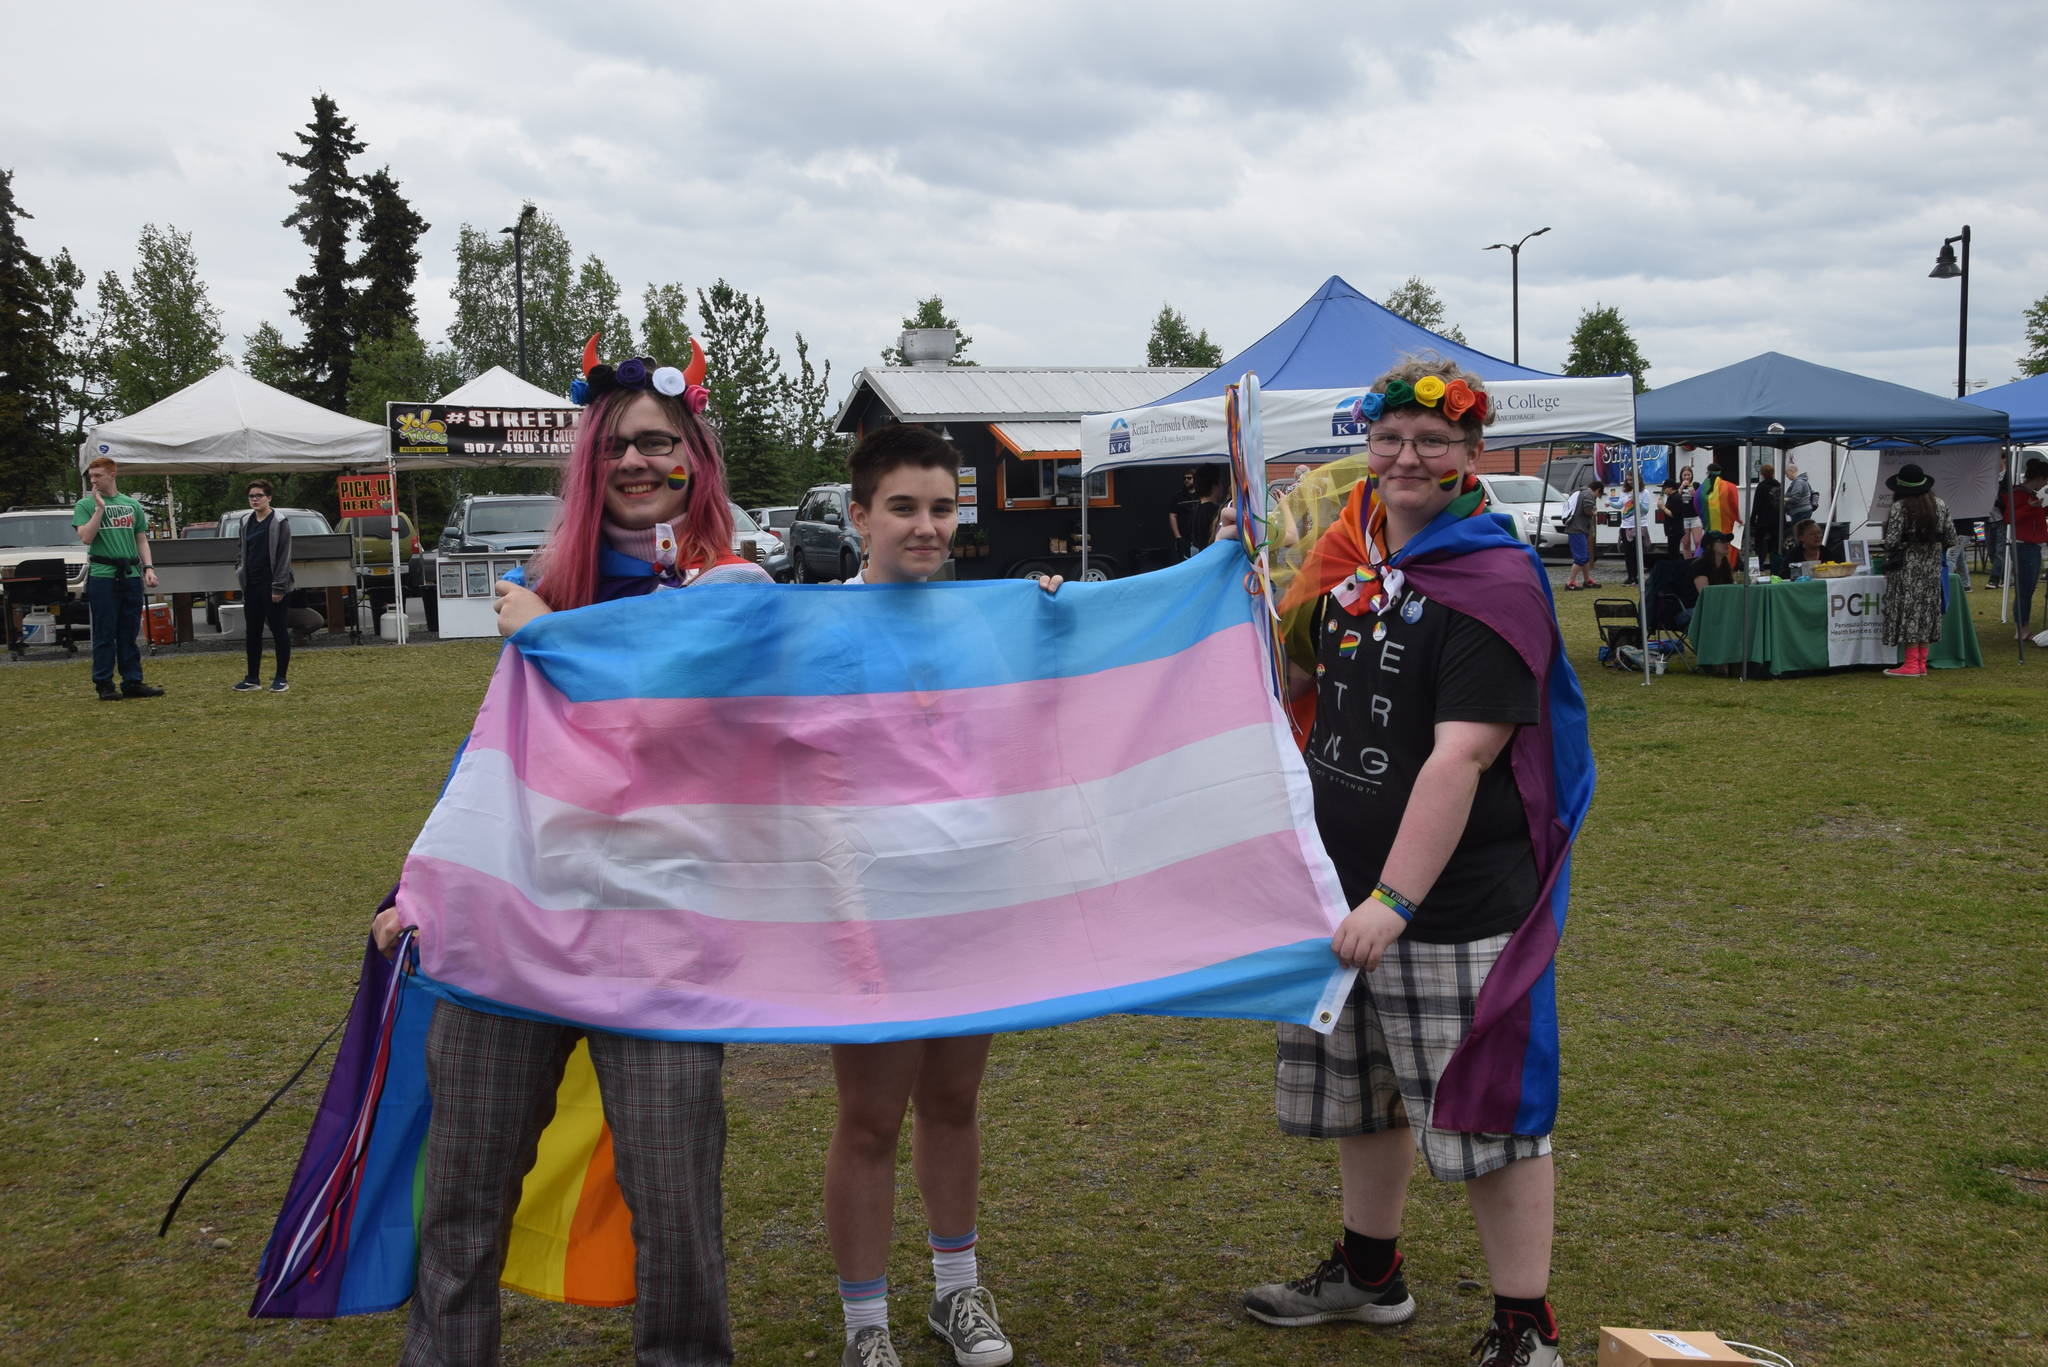 From left, Timmy Opheim, Jacey Kosto and Charlie Rogers hold up the Trans Pride Flag during the 2019 Soldotna Pride Celebration in Soldotna Creek Park on Saturday, June 15, 2019. (Photo by Brian Mazurek/Peninsula Clarion)